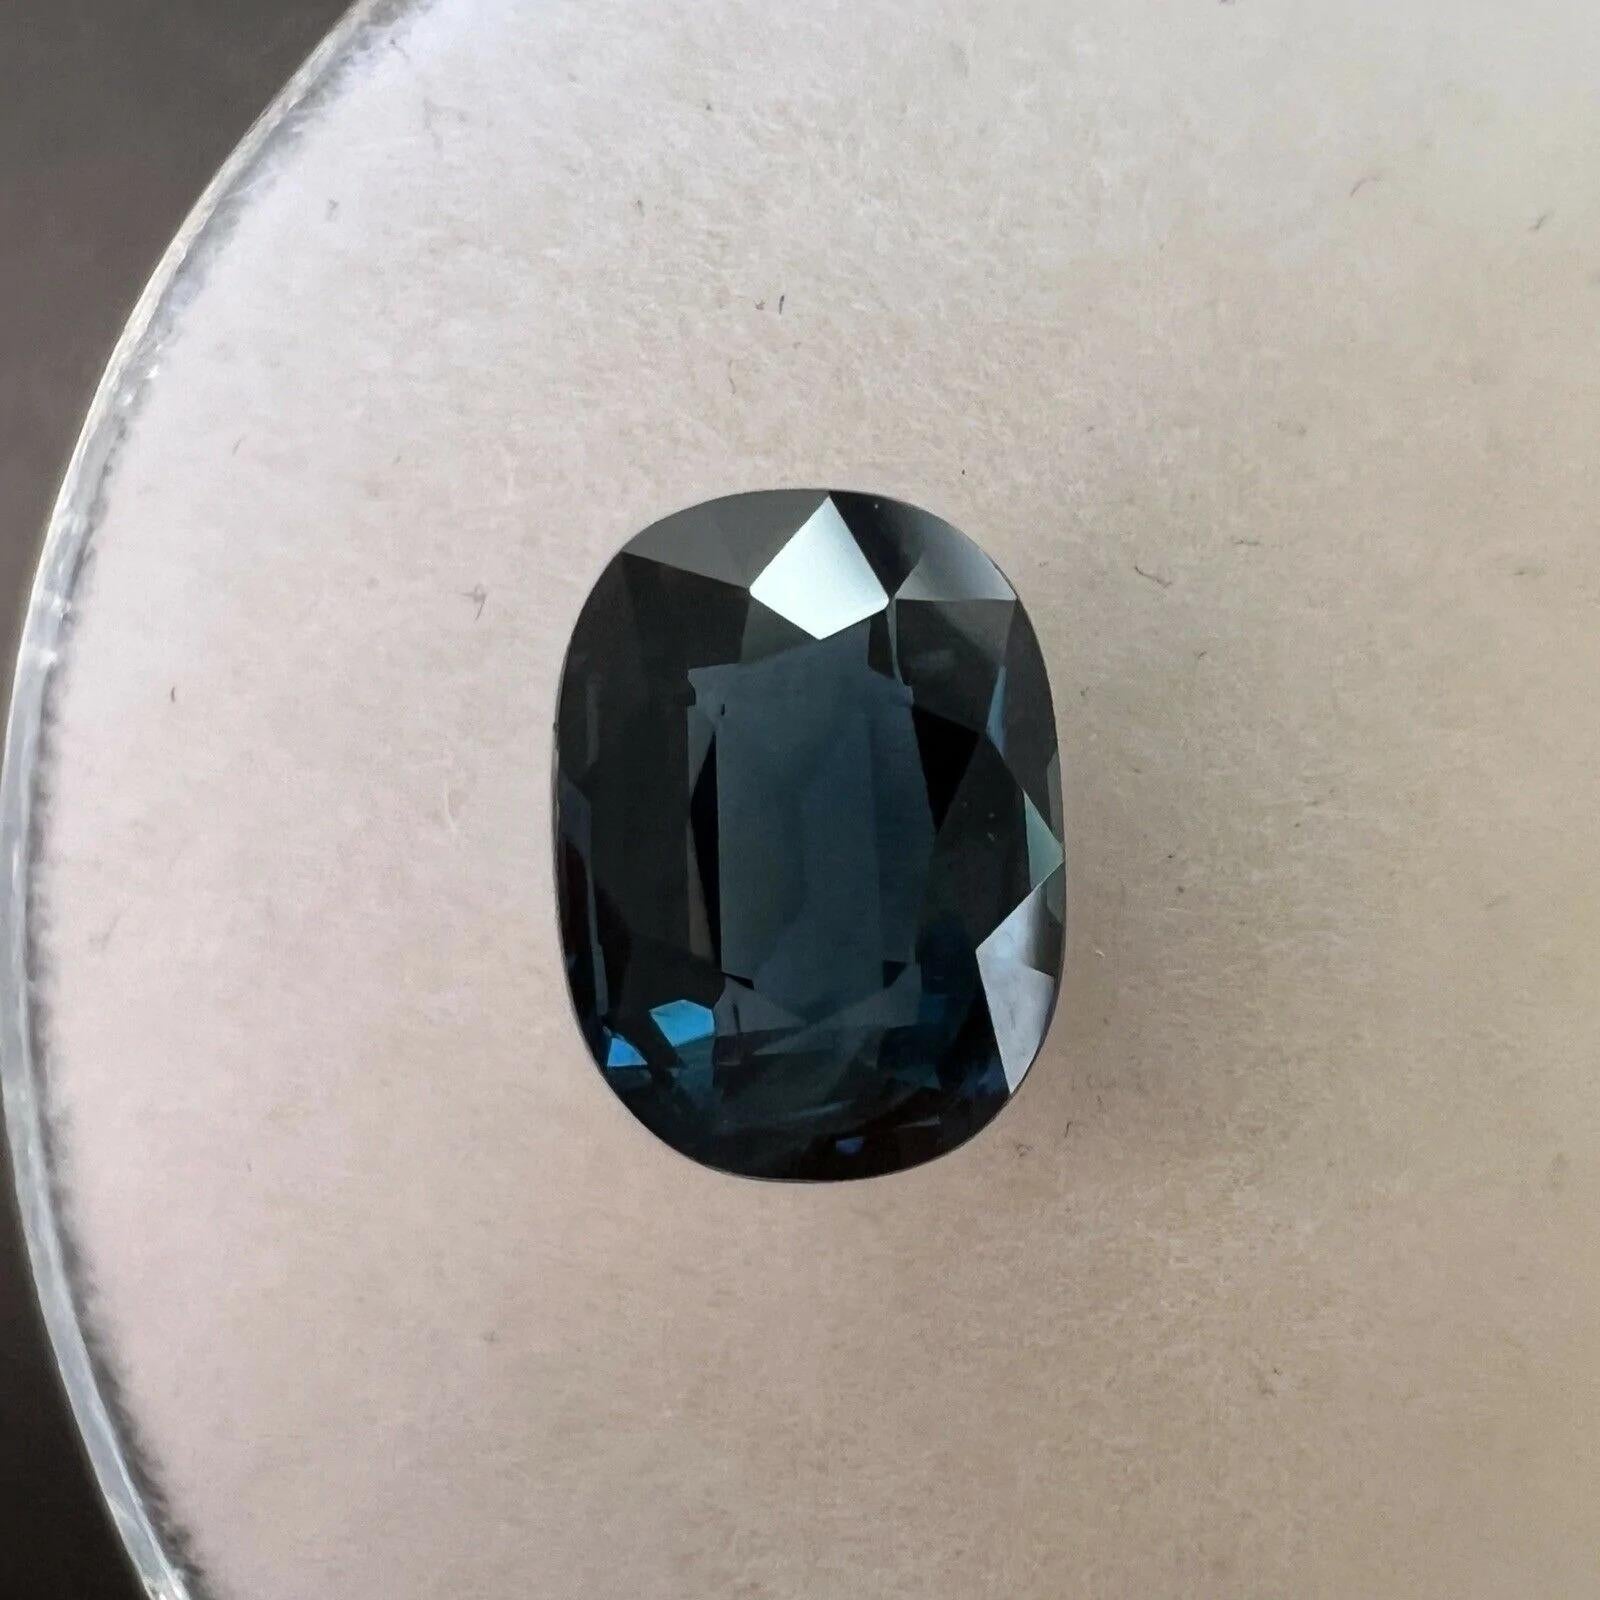 GRA Certified 1.00ct Fine Blue Sapphire Oval Cut Rare Untreated Gem 6.5x4.5mm

GRA Certified Untreated Deep Blue Sapphire Gemstone.
1.00 Carat sapphire with a beautiful deep blue colour. Fully certified by GRA confirming stone as natural. Also has